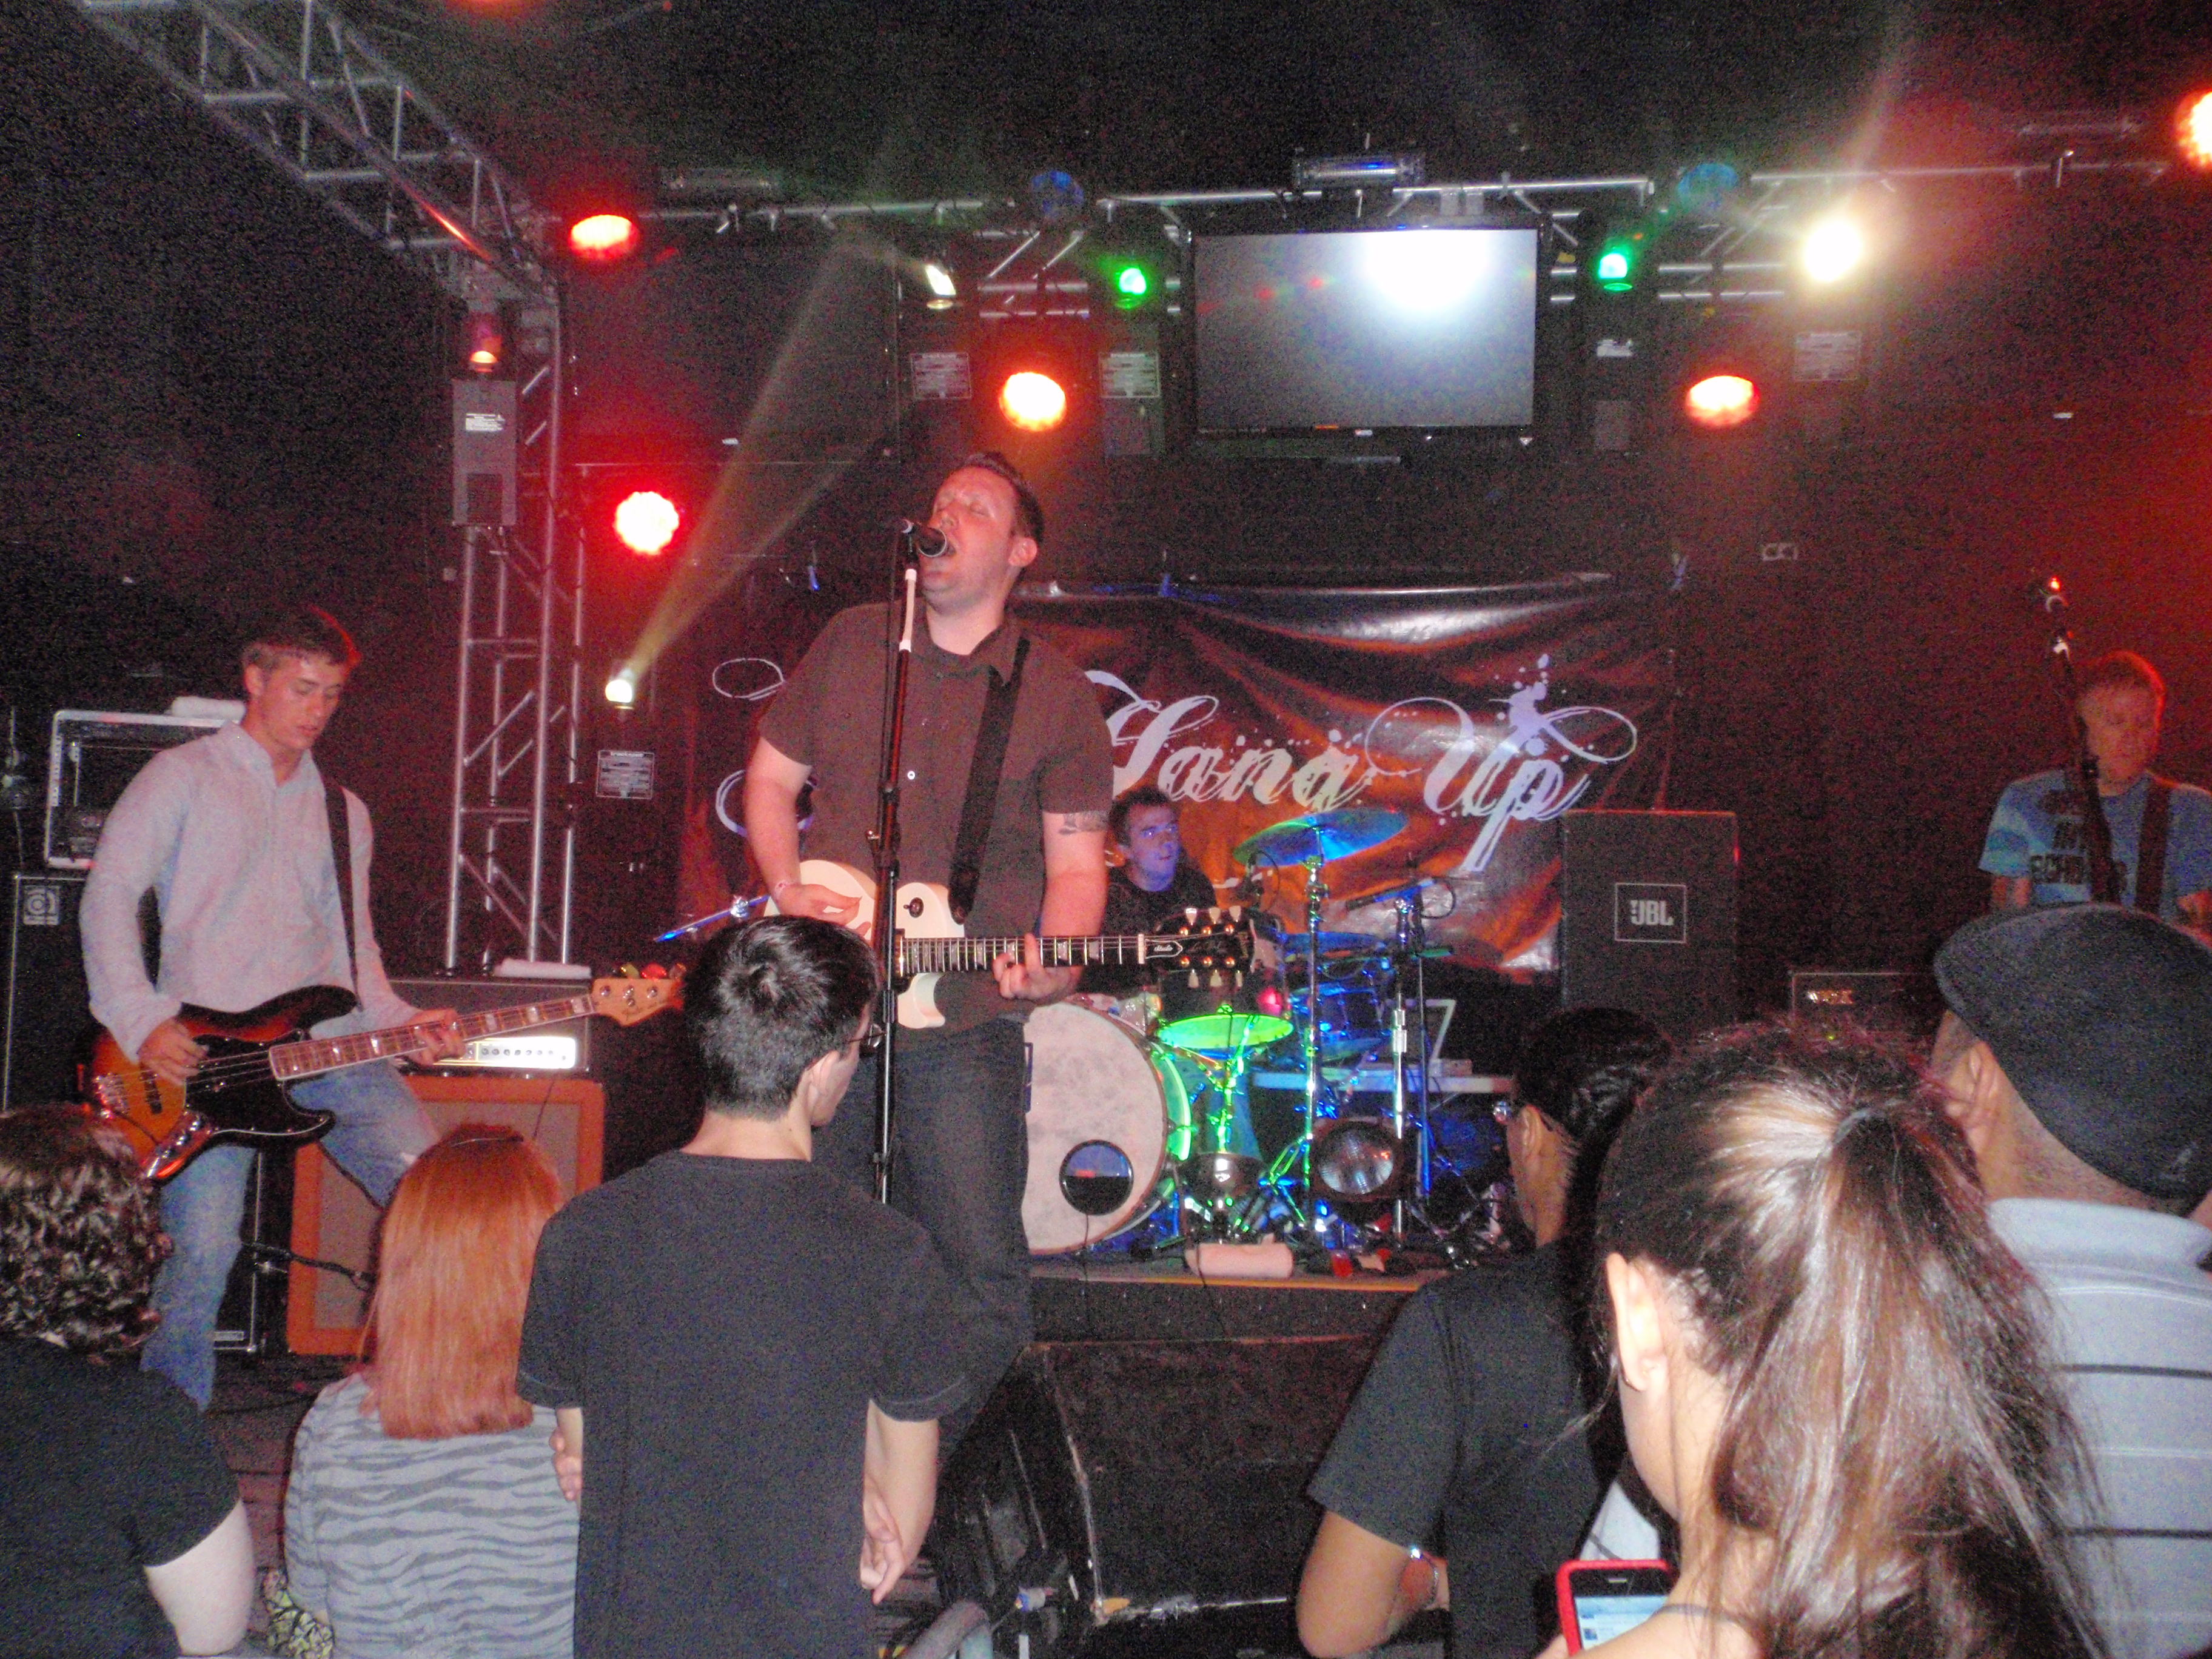 You Hang Up performing in September 2010